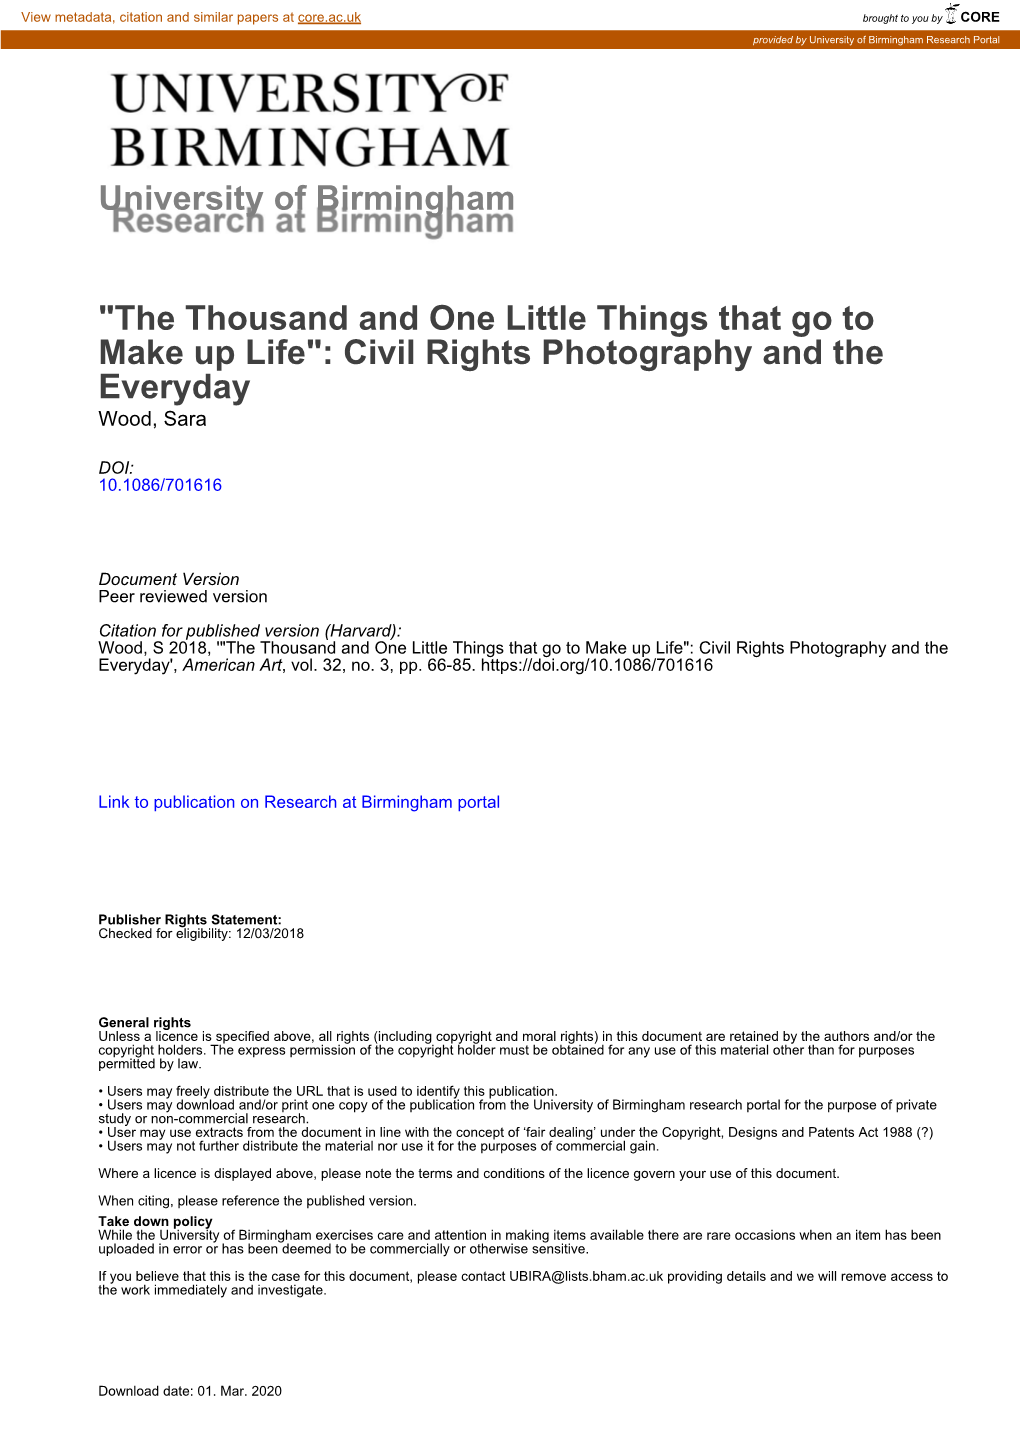 Civil Rights Photography and the Everyday Wood, Sara